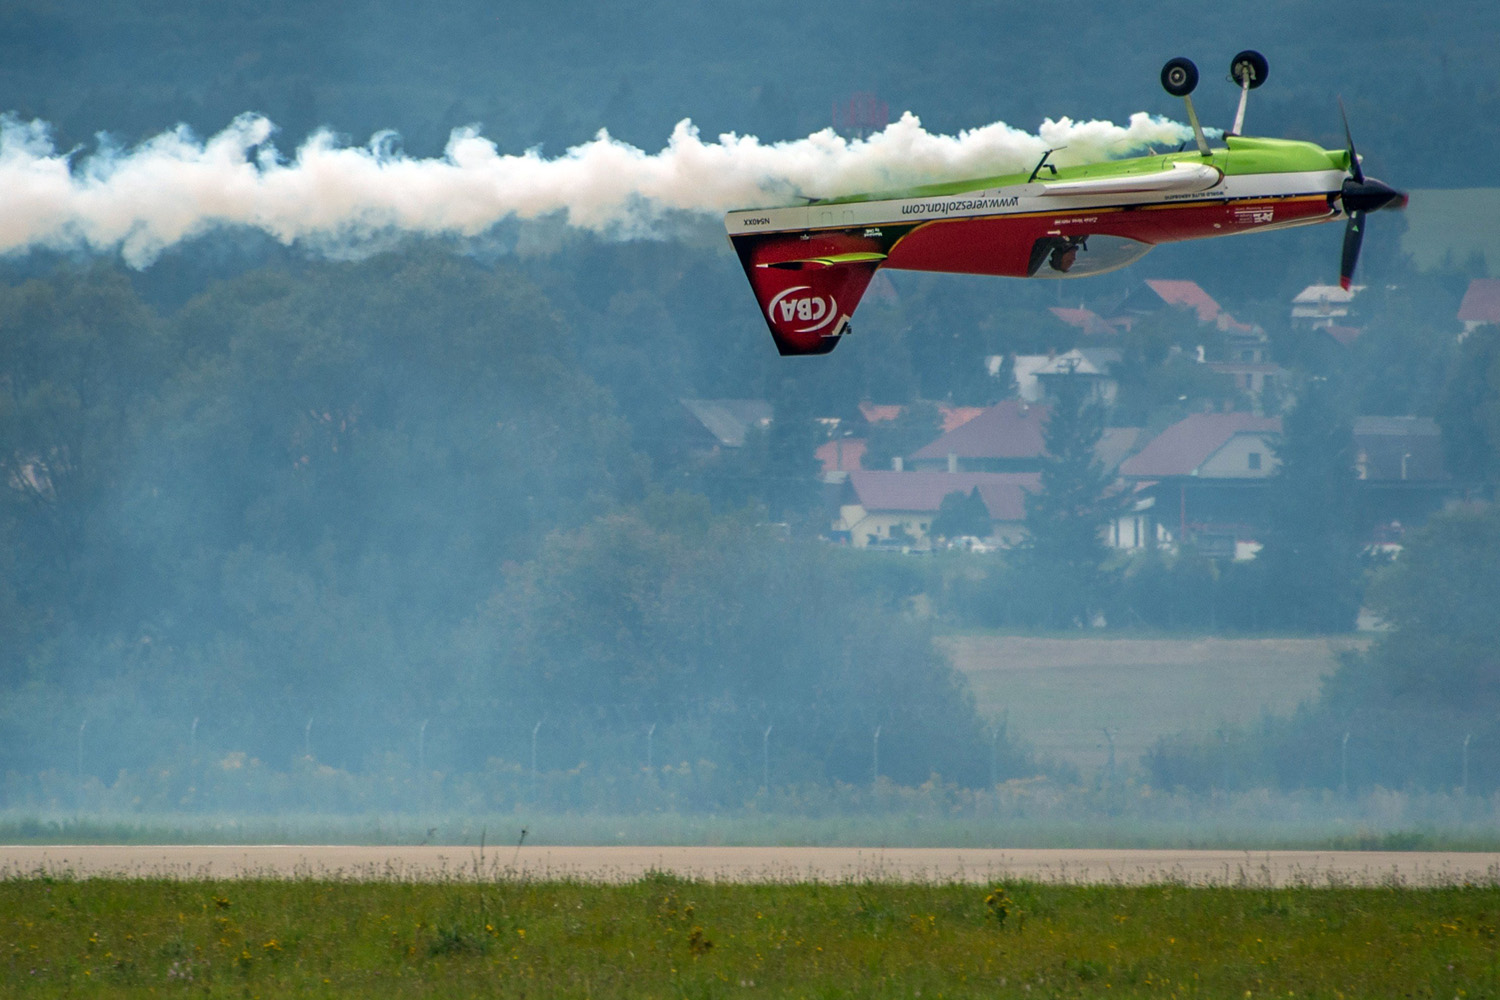 Legendary acrobatic pilot Zoltan Veres of Hungary on his MXS aircraft demonstrates his skills with his F-16 at the Slovak International Air Fest SIAF 2014 at the Airforce Base of Sliac, Slovakia on Aug. 30, 2014.